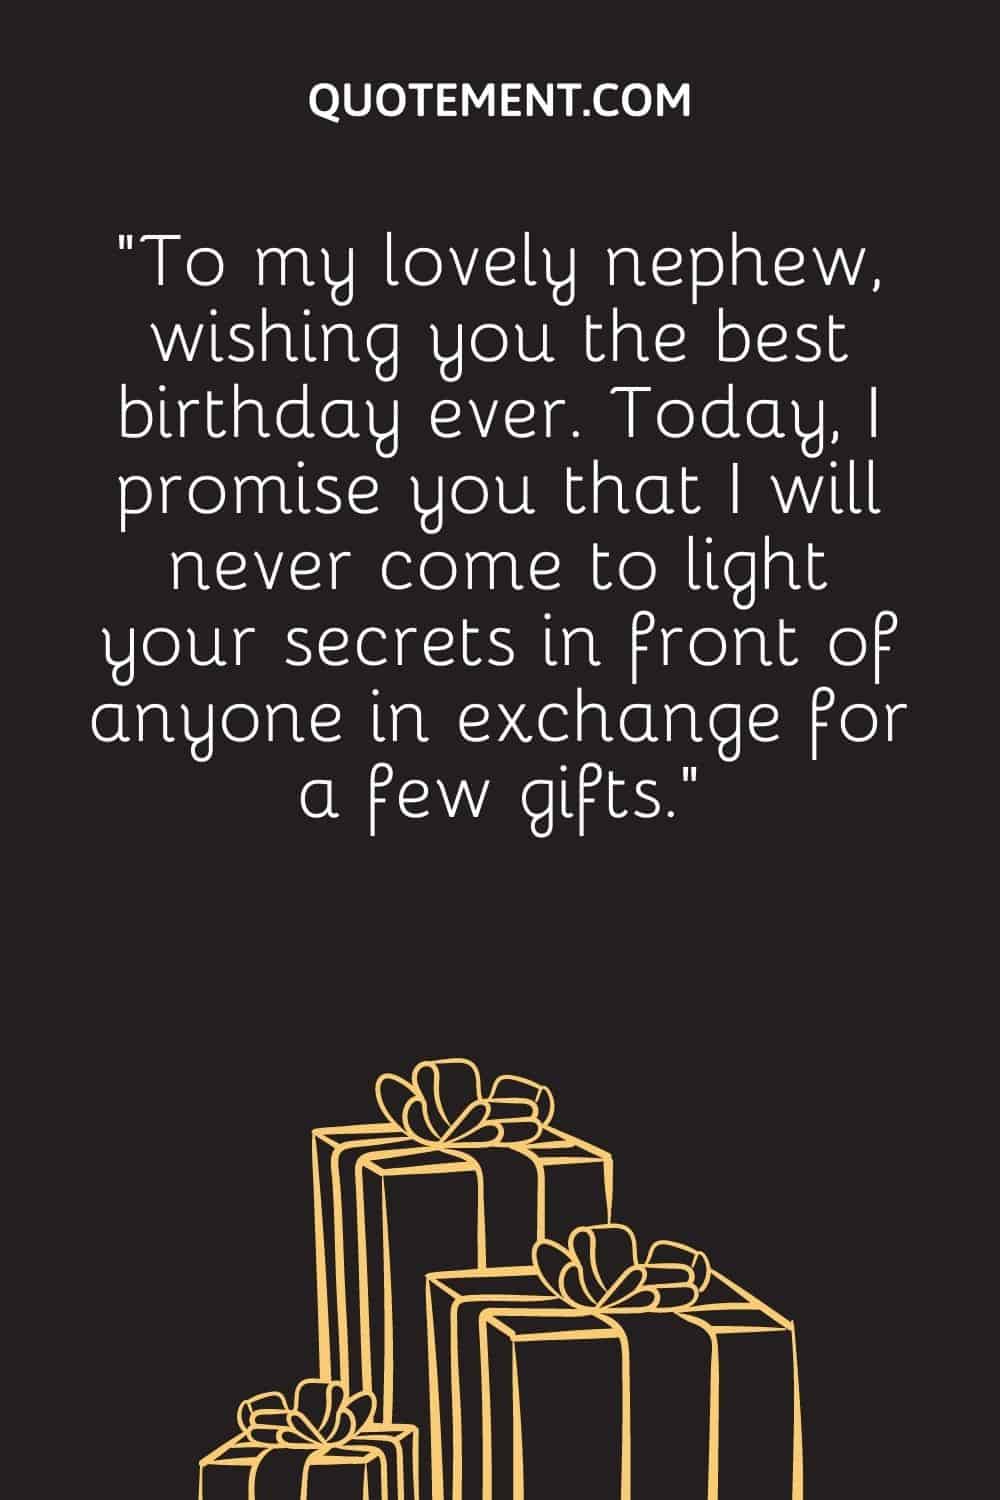 “To my lovely nephew, wishing you the best birthday ever. Today, I promise you that I will never come to light your secrets in front of anyone in exchange for a few gifts.”